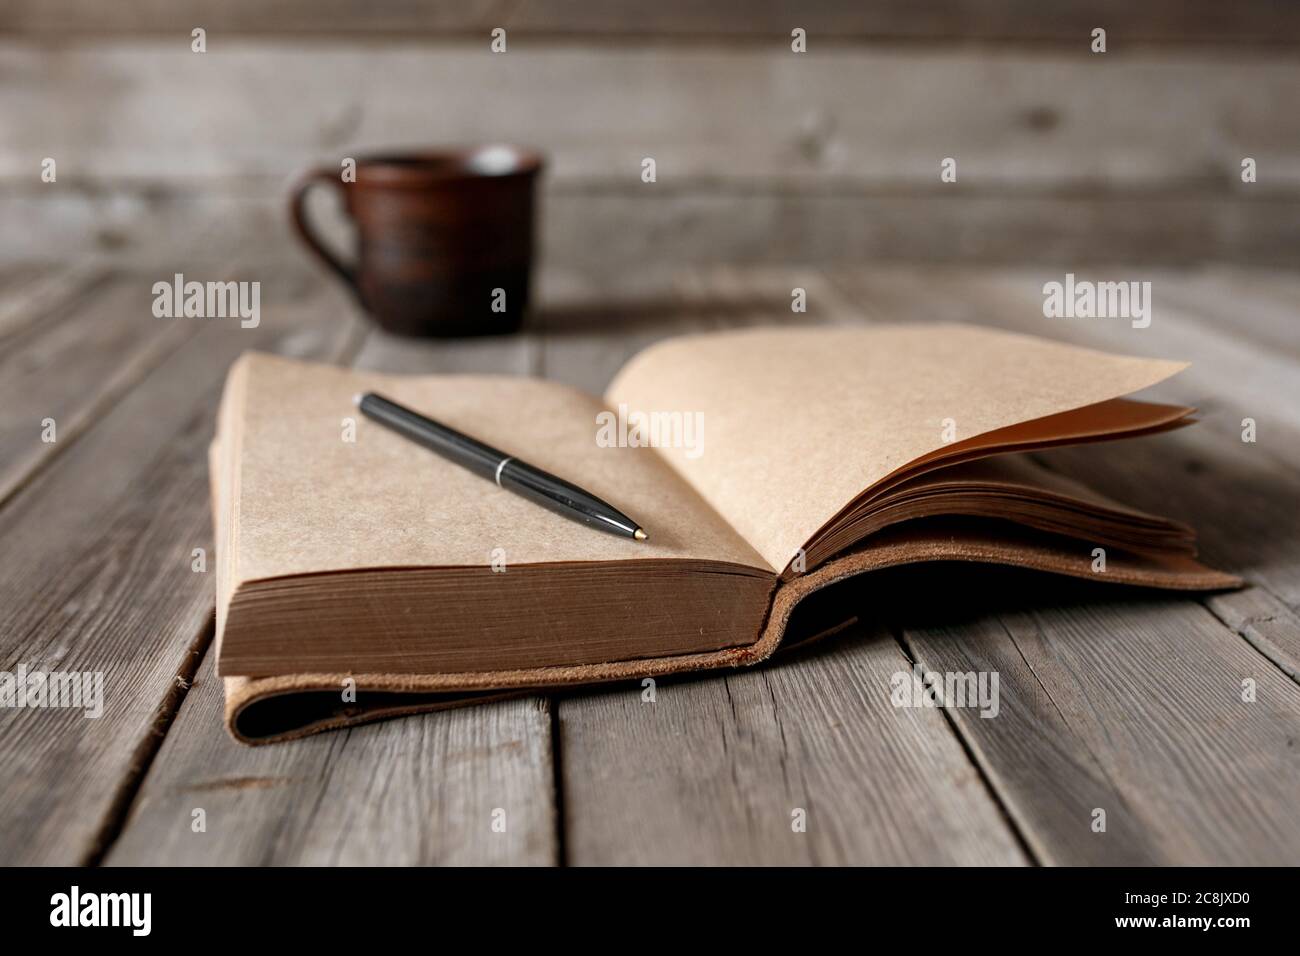 Office desk with blank screen smartphone,pen,notebook and coffee cup on wood table.Top view with copy space.Office supplies and gadgets on desk table.Working desk table concept.Flat lay image. Stock Photo